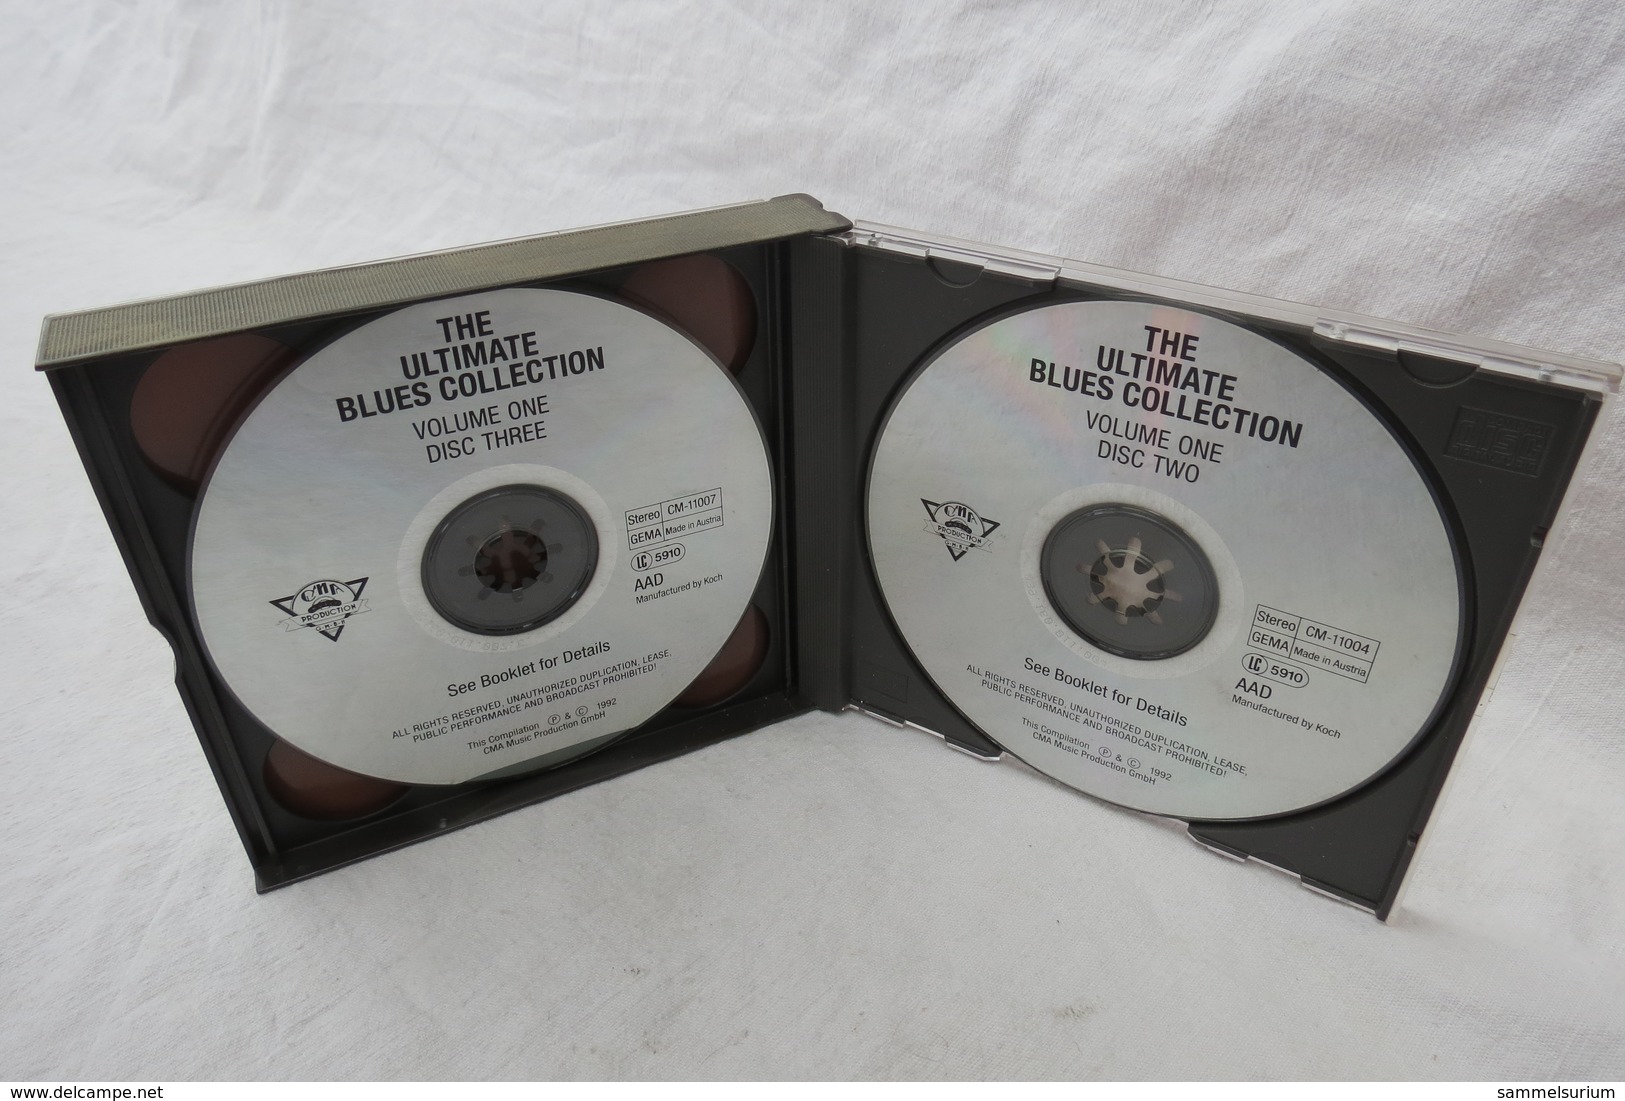 3 CD-Set "The Ultimate Blues Collection" Volume One - Blues